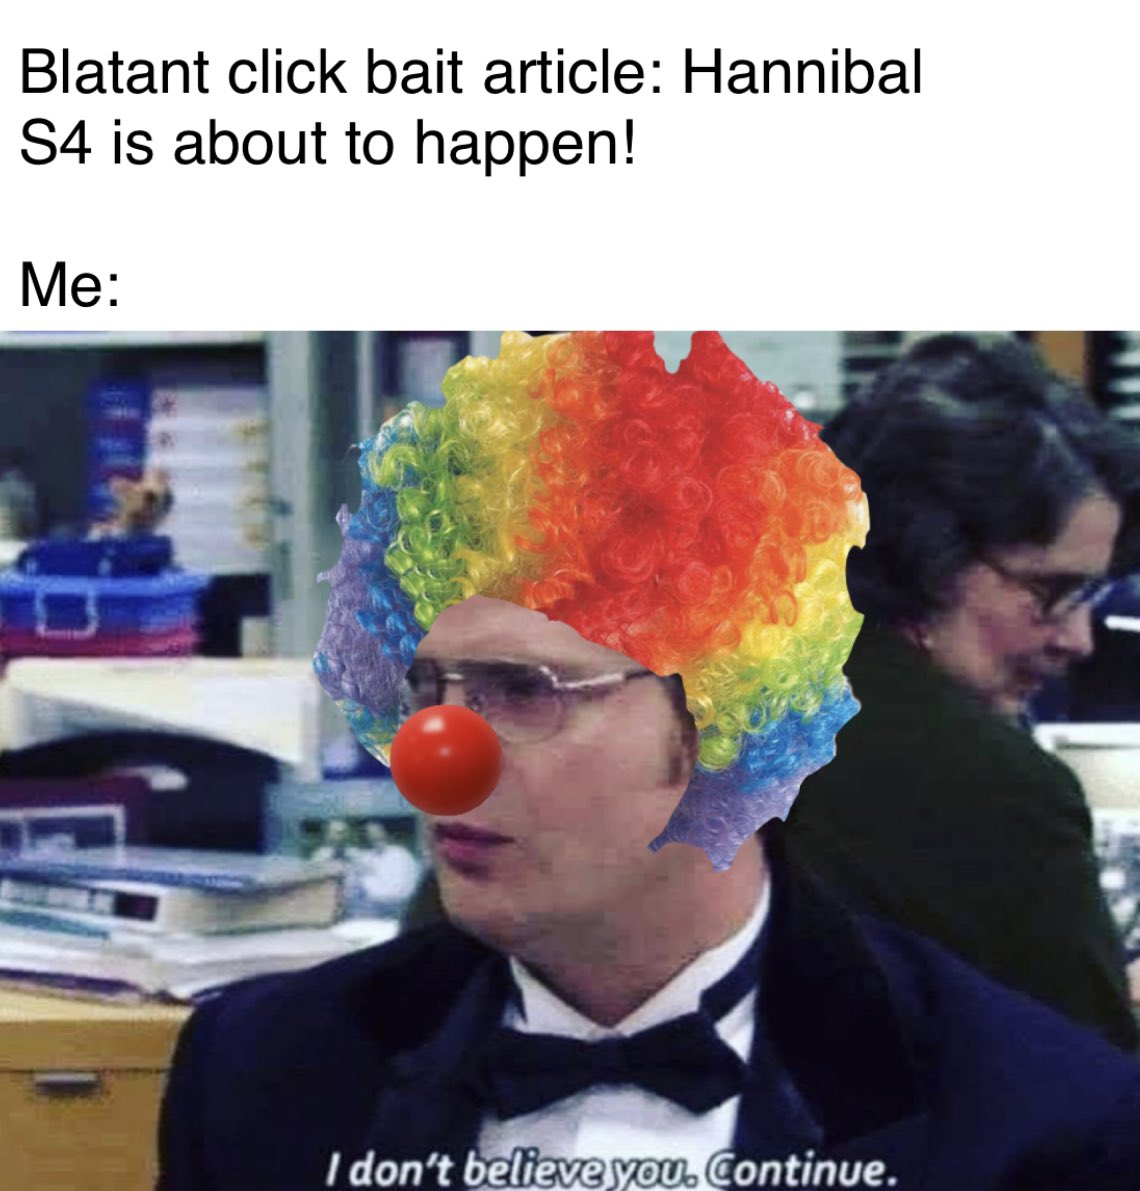 Posting #hannibal related memes until they #savehannibal, day 684.